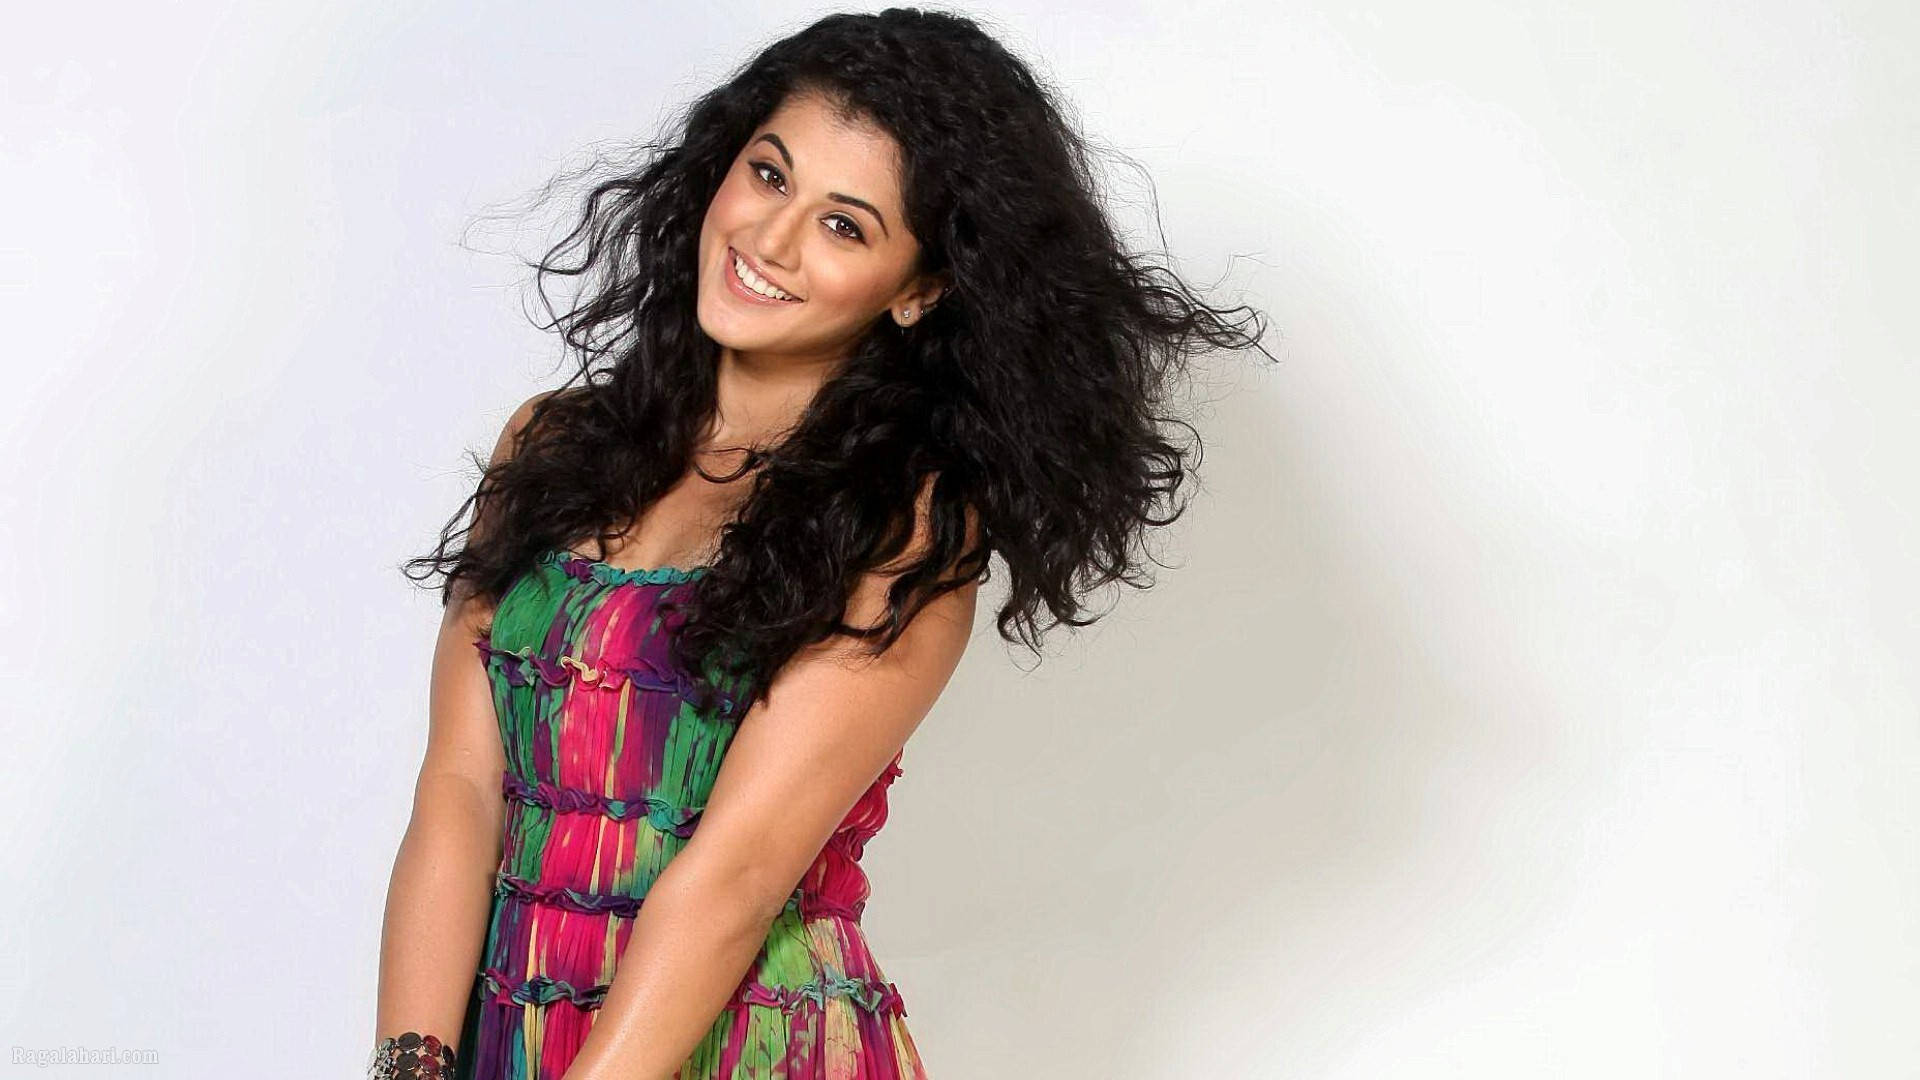 Adorable Taapsee Pannu Wallpaper